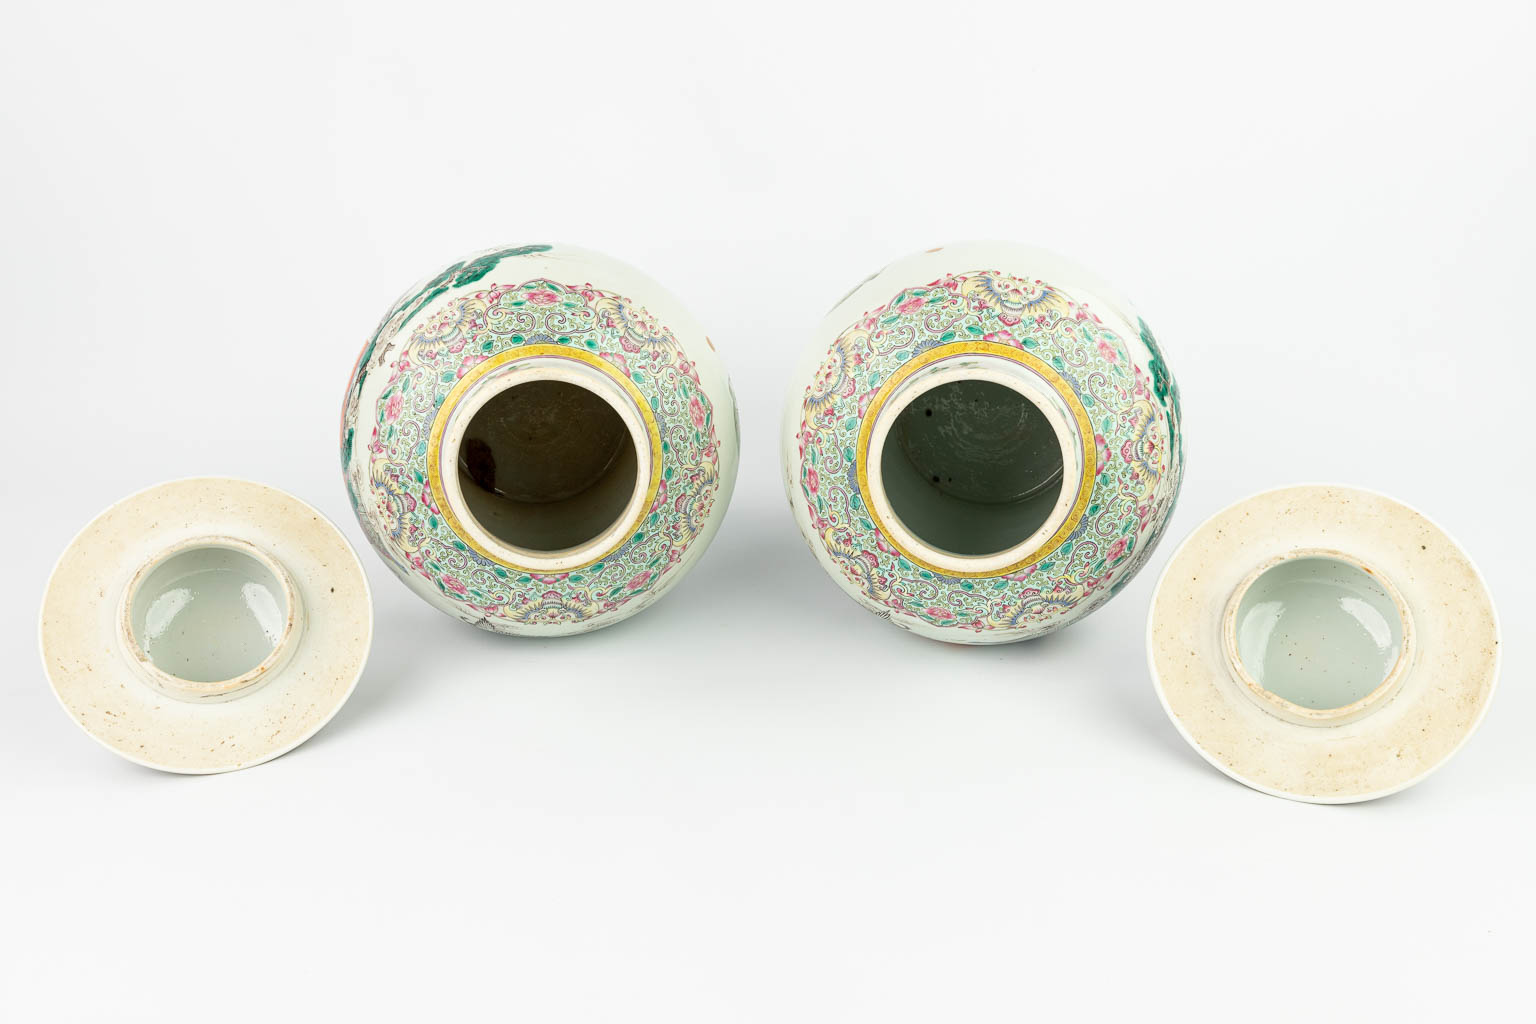 A pair of Chinese baluster vases with hand-painted decor 